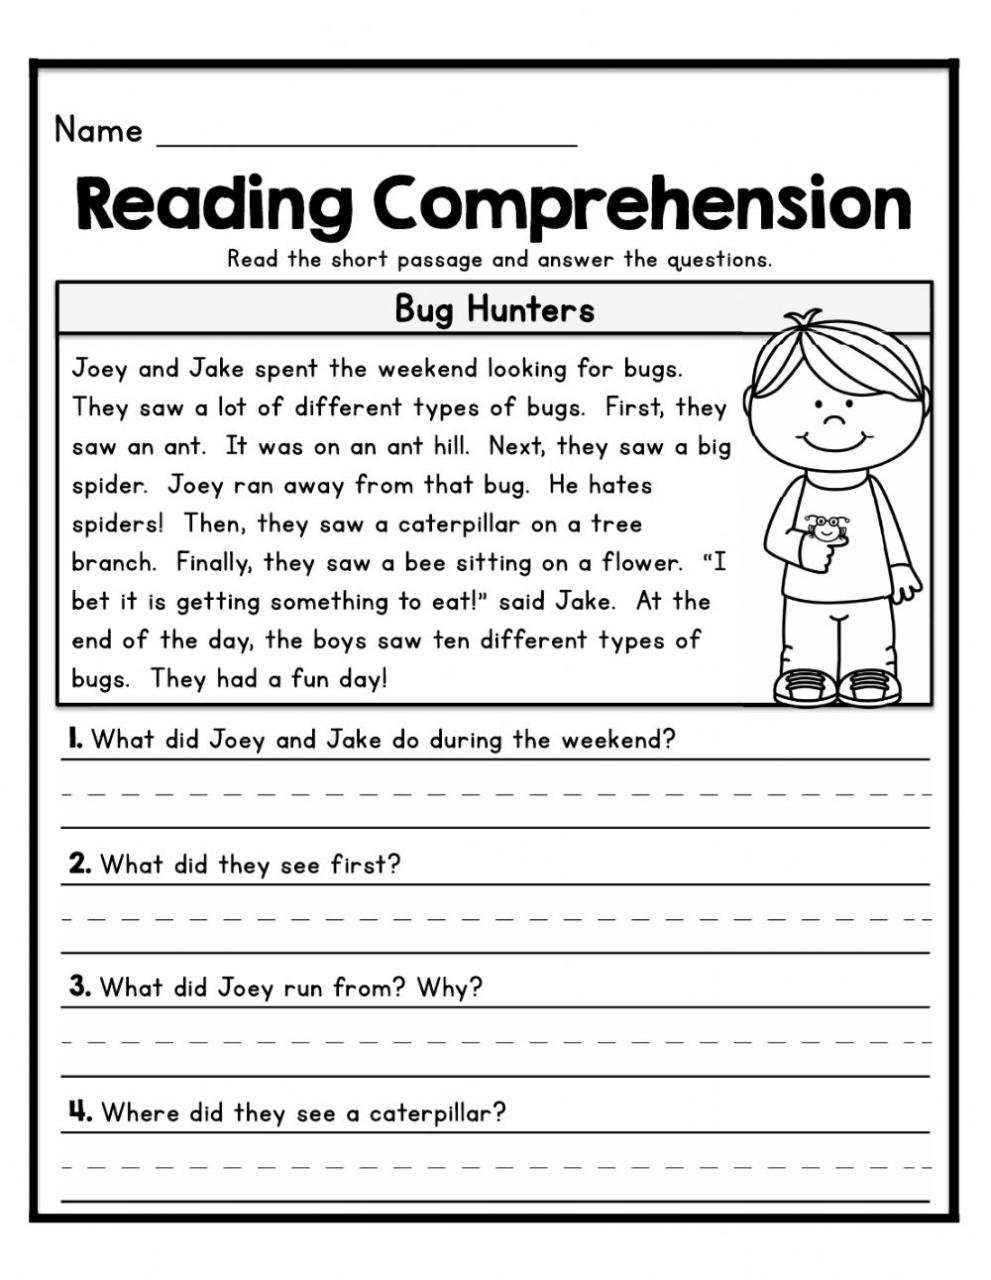 Reading Comprehension online exercise for Grade 1